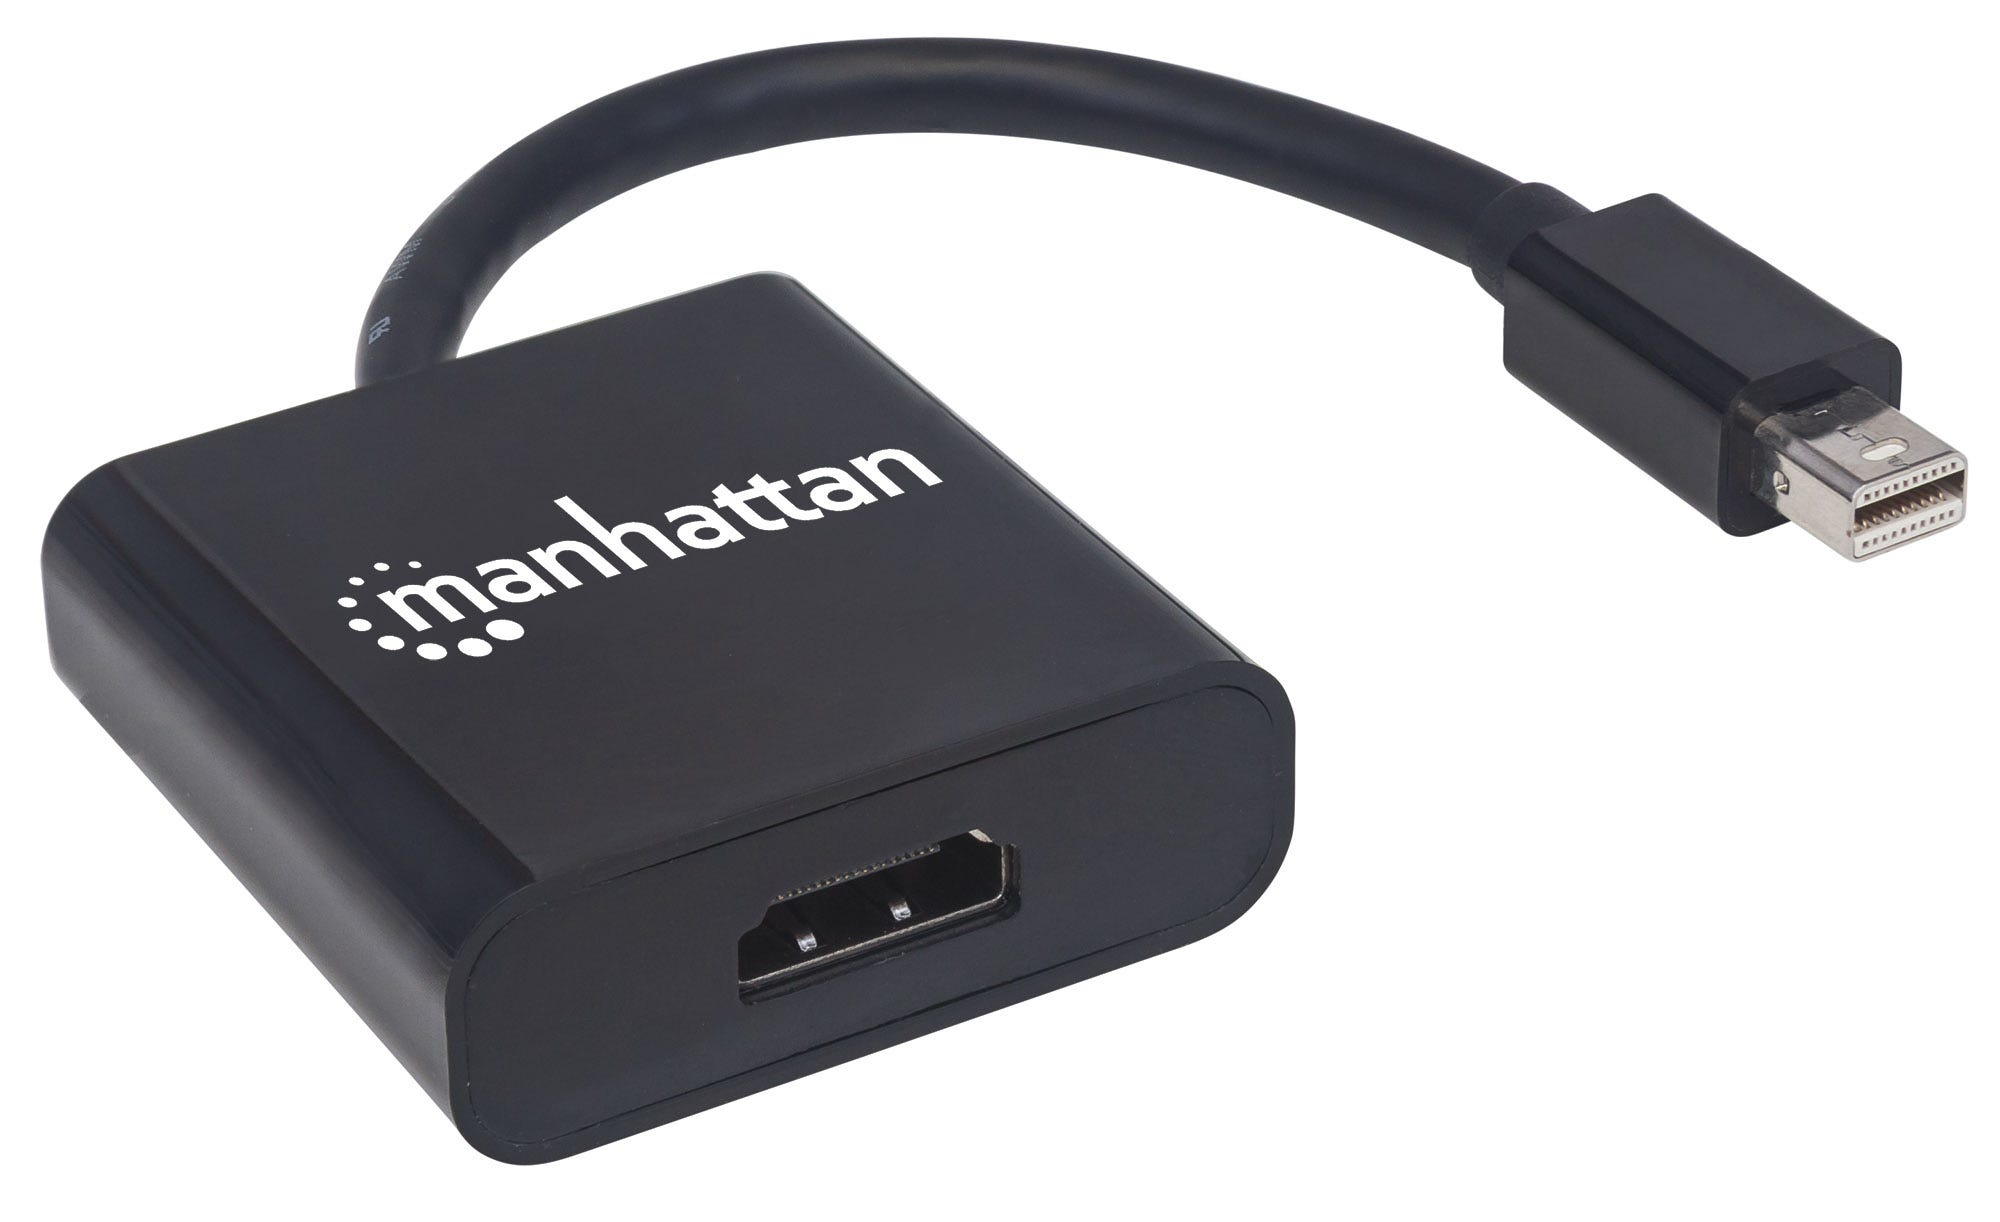 Manhattan Mini DisplayPort to HDMI Adapter Cable, 4K, 19.5cm, Male to Female, Active, 4K@60Hz, Black, Polybag